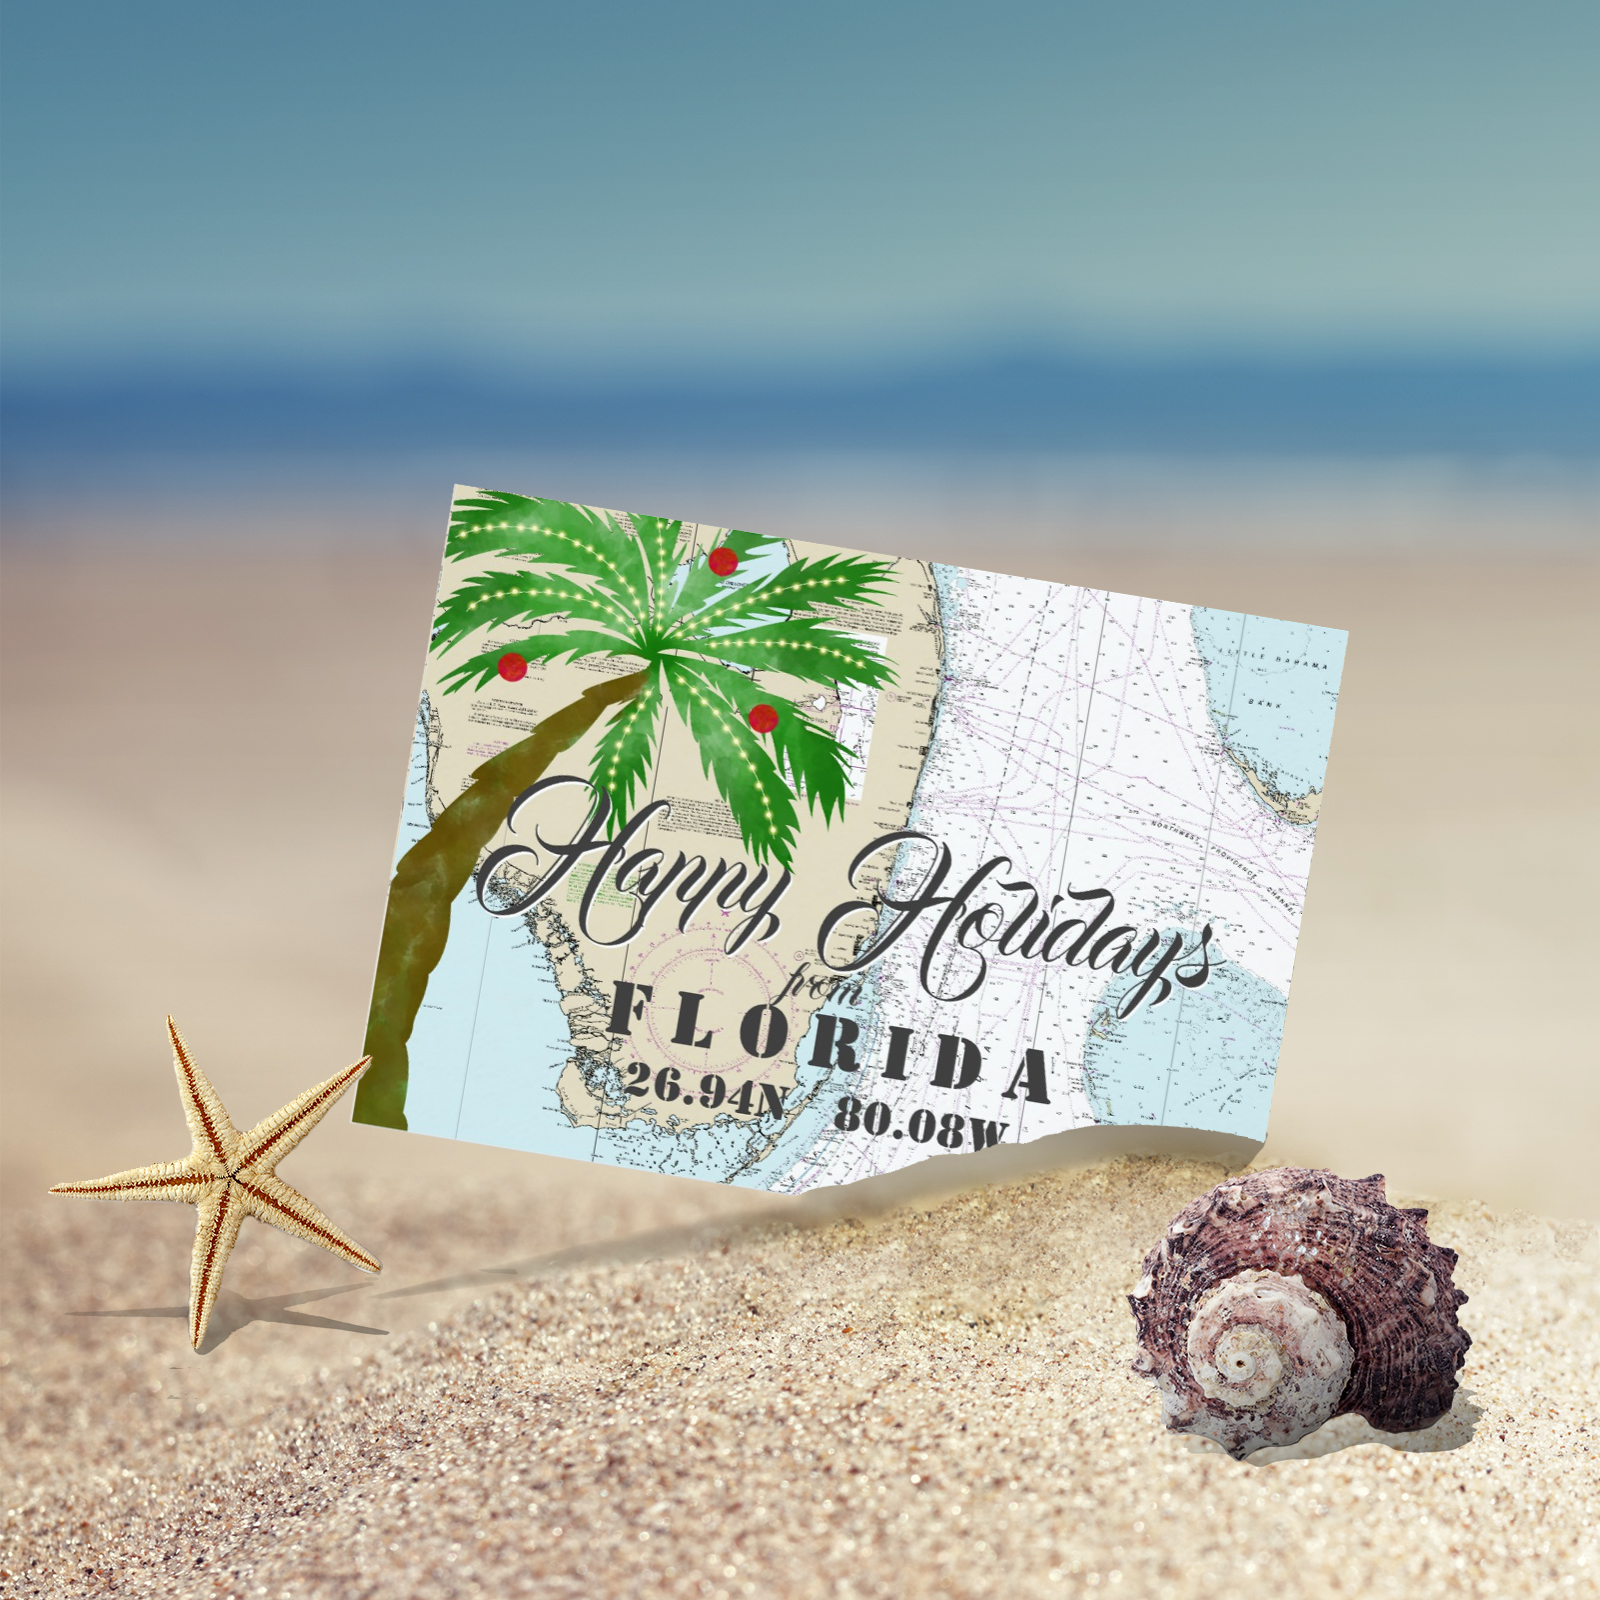 Tropical Happy Holidays from Florida Card Design